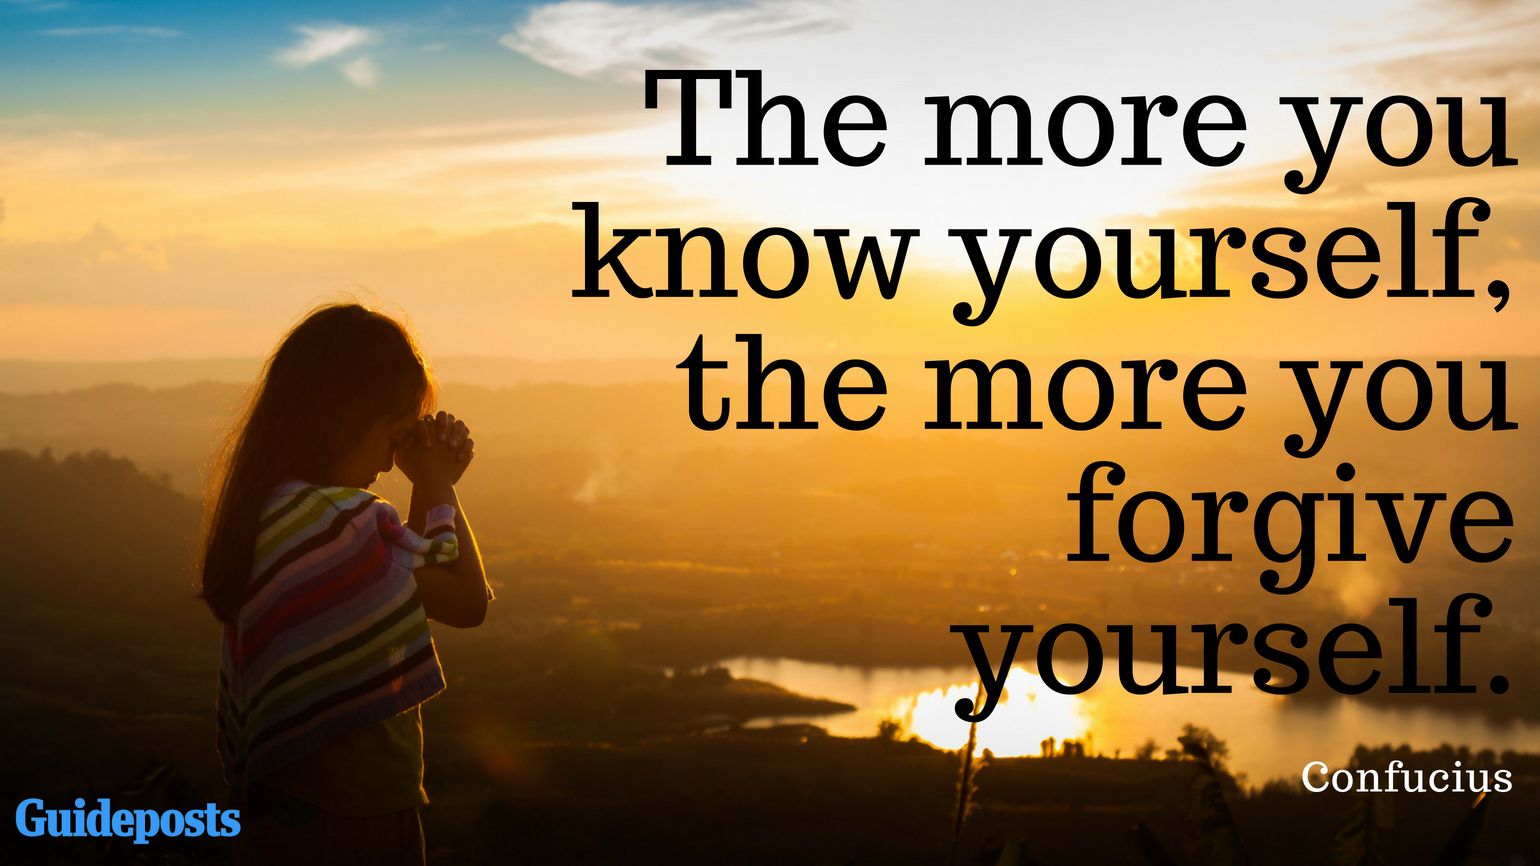 The more you know yourself, the more you forgive yourself. ― Confucius